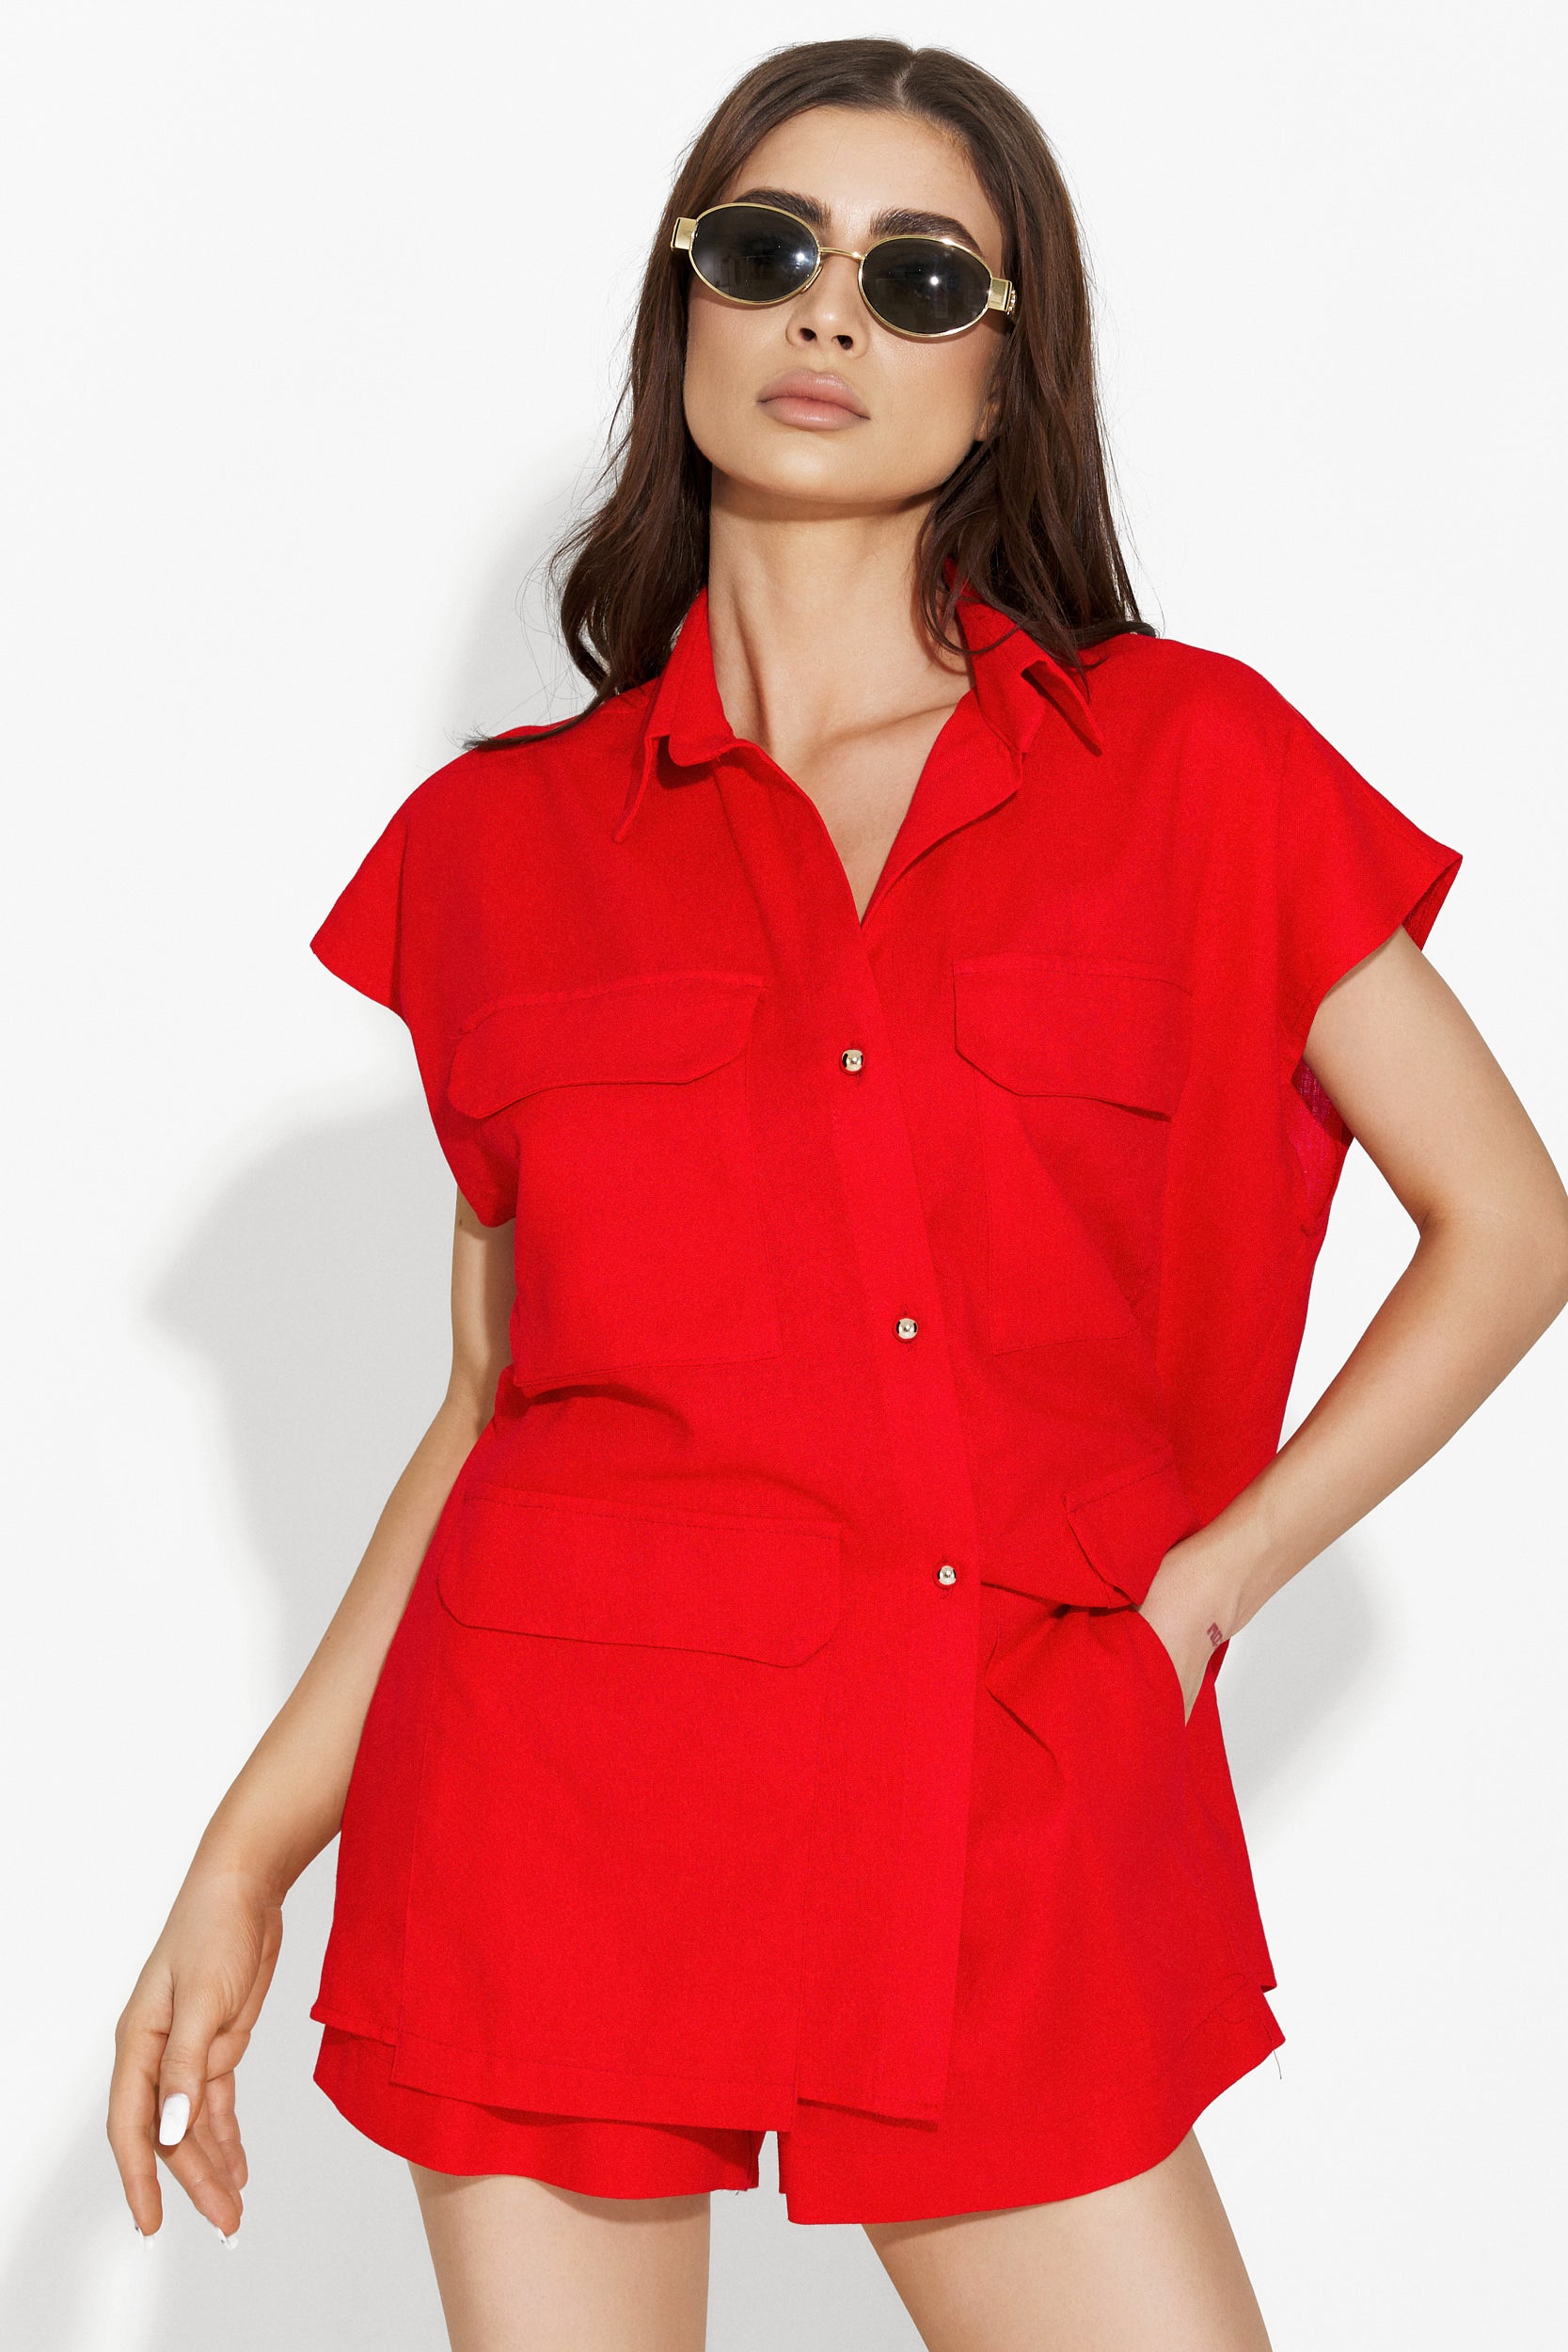 Rodysa Bogas red casual trouser suit